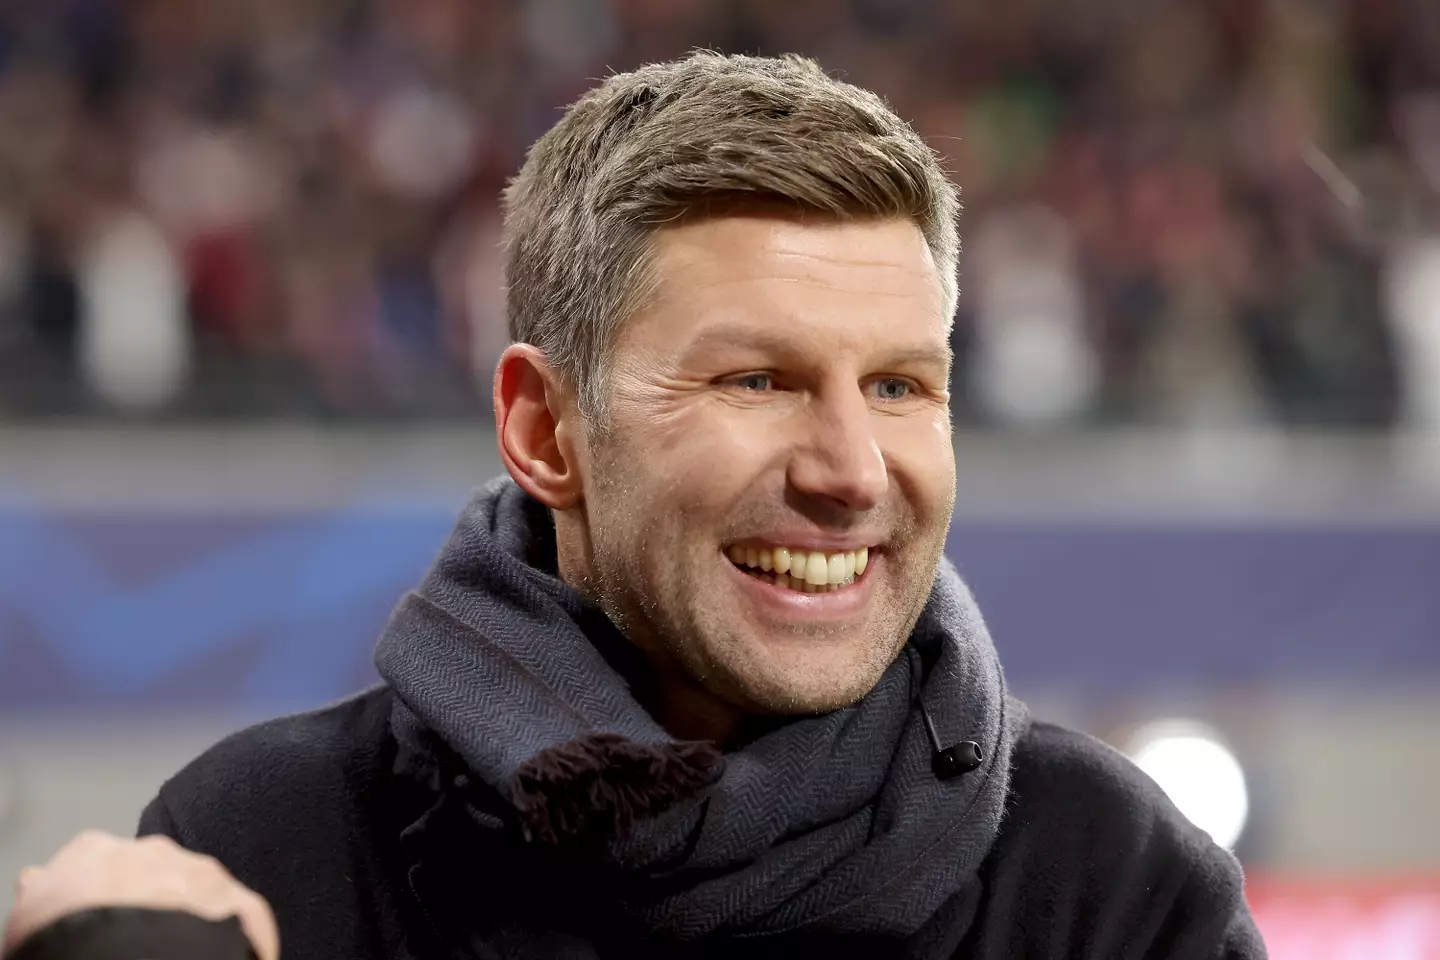 Thomas Hitzlsperger came out as gay after calling time on his career. Image: Getty